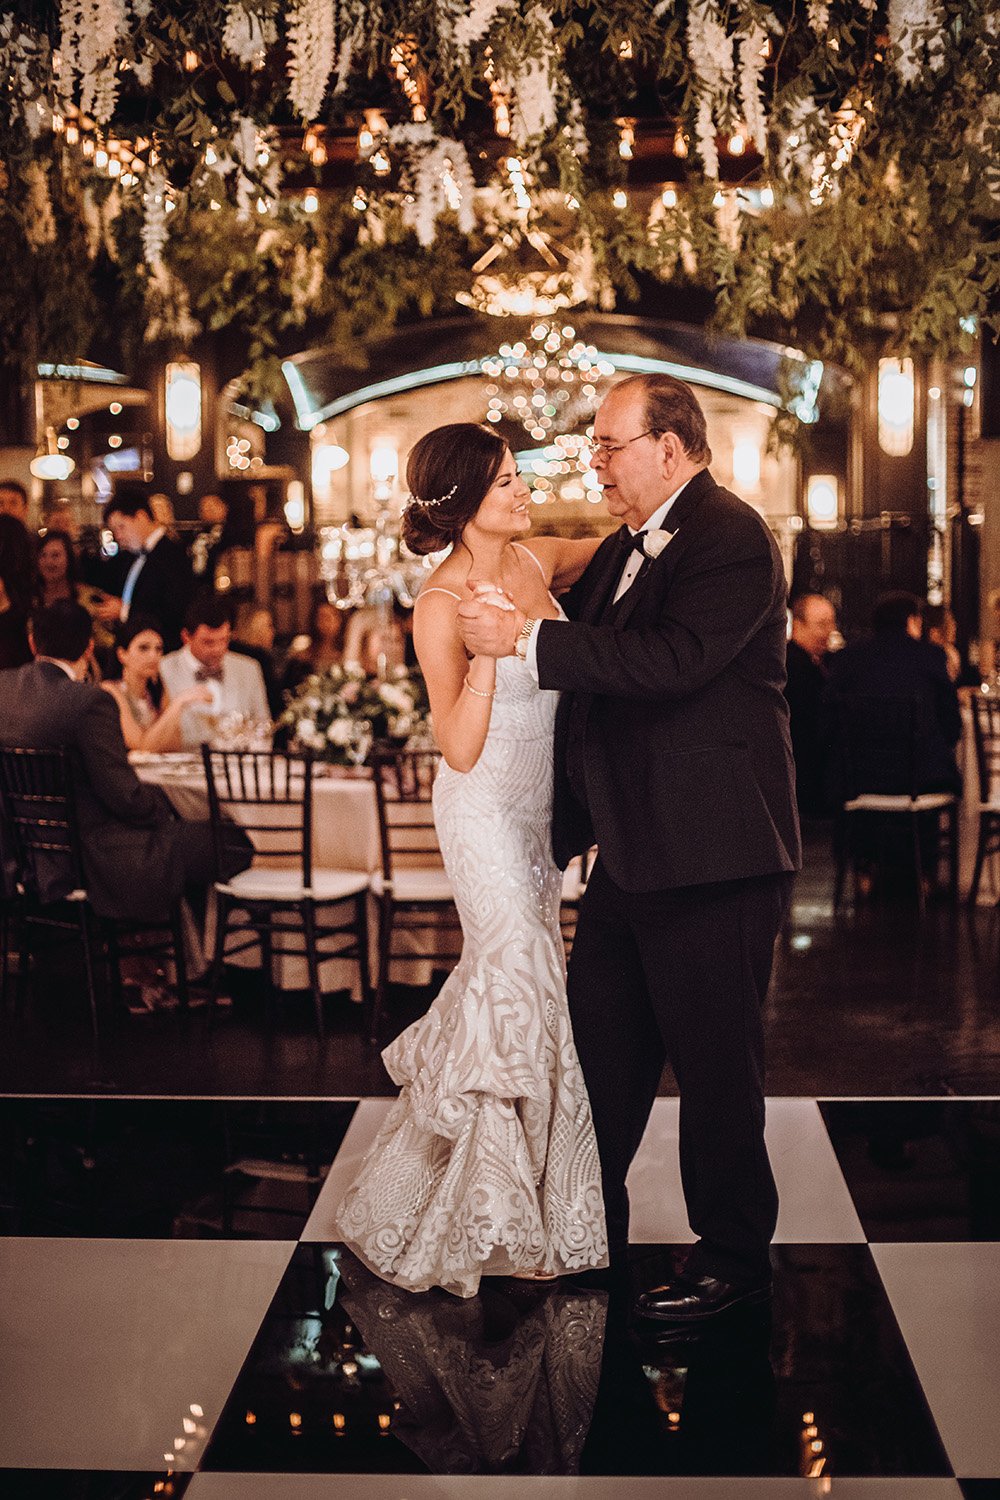 father daughter dance inspiration at wedding reception